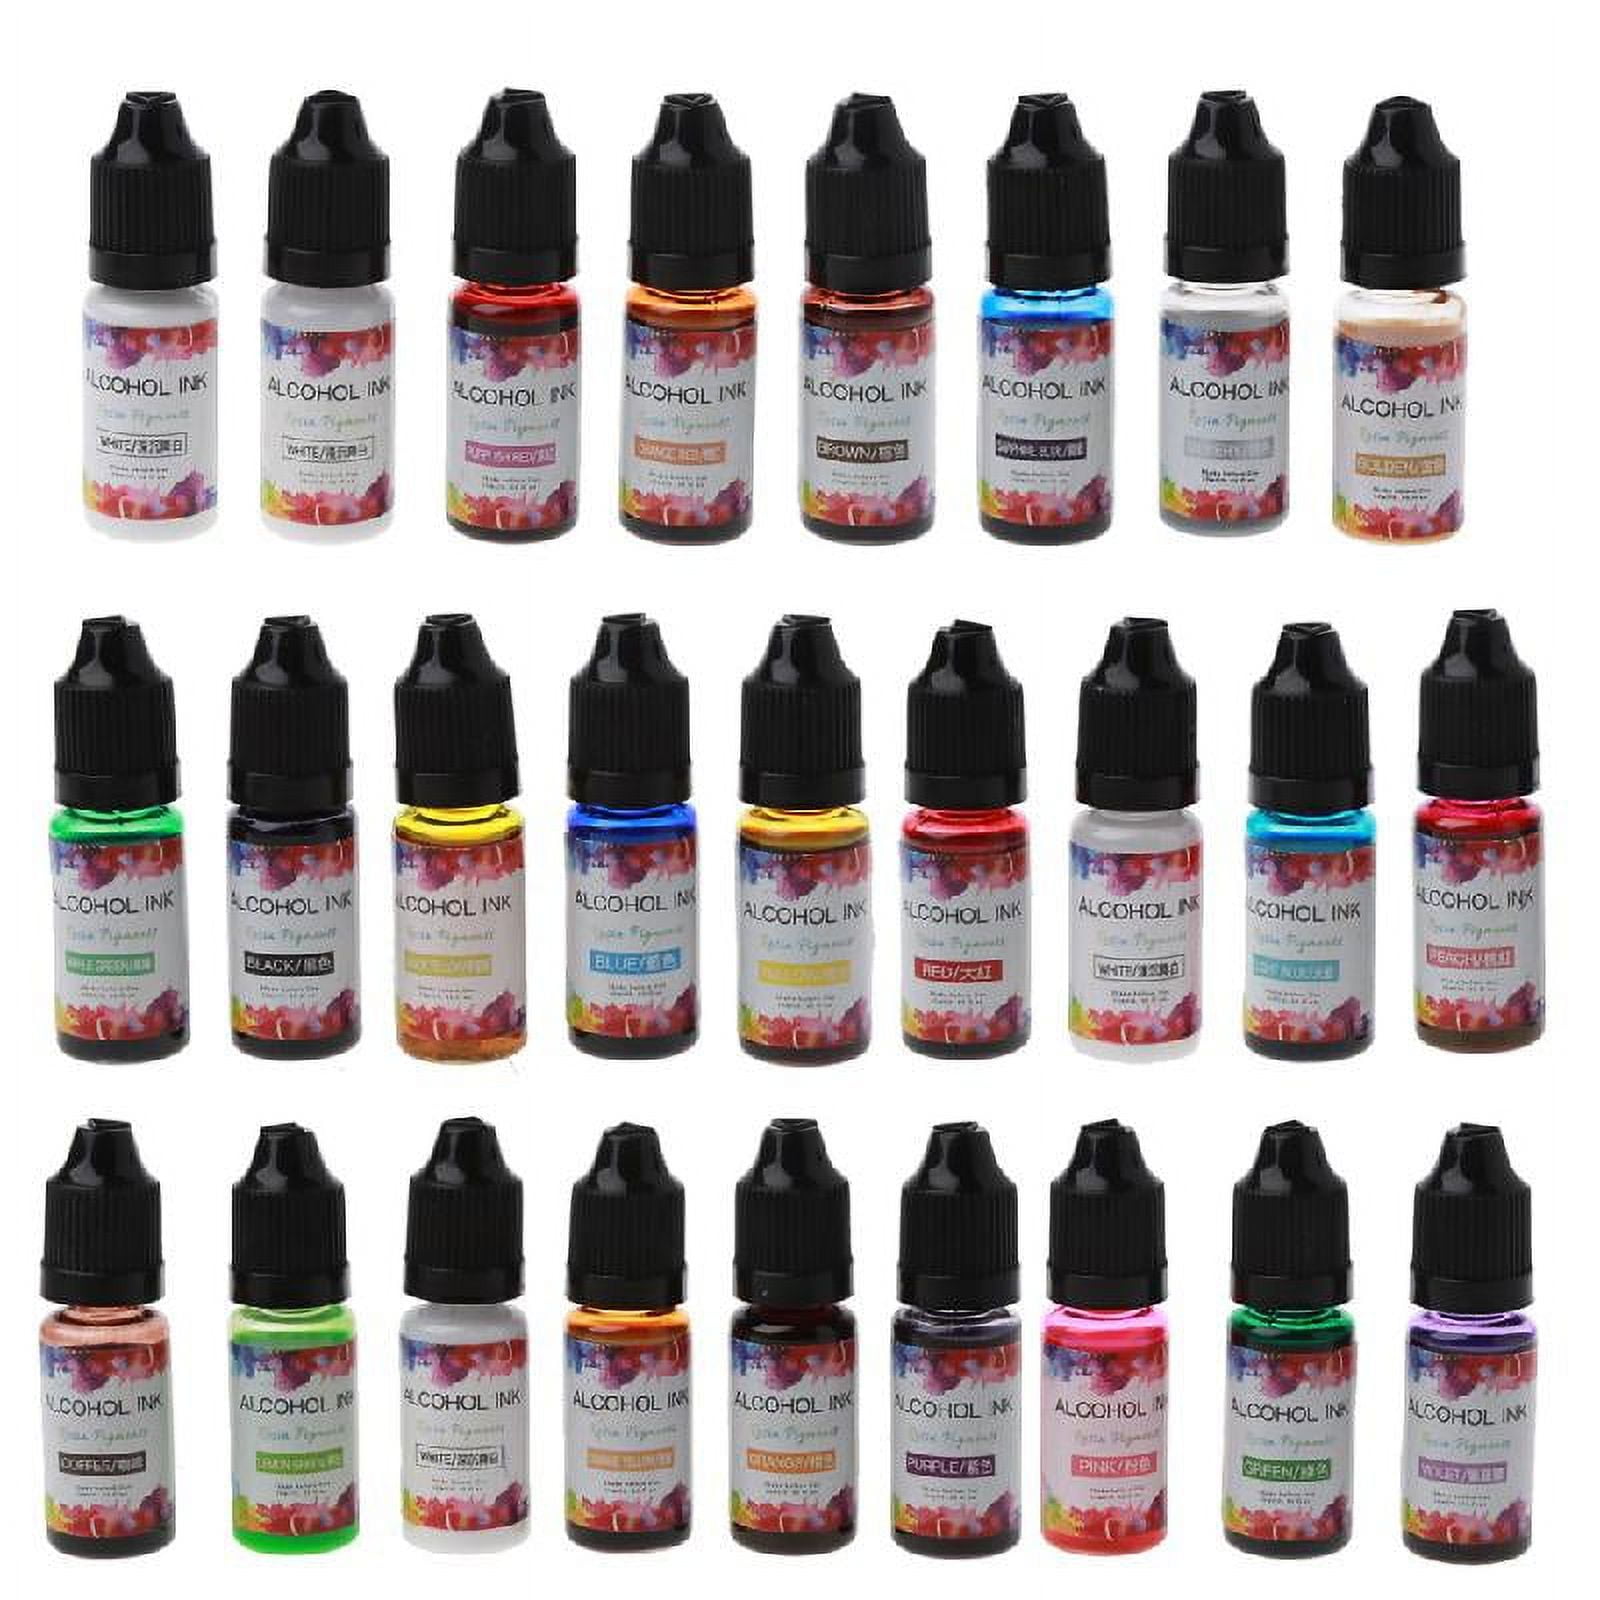  Alcohol Ink for Epoxy Resin - 24 Bottles Alcohol-Based Ink Set  Vibrant Color High Concentrated Alcohol Paint Pigment Resin Ink for Resin  Dye Crafts Tumblers Acrylic Fluid Art Painting, 10ml/0.35